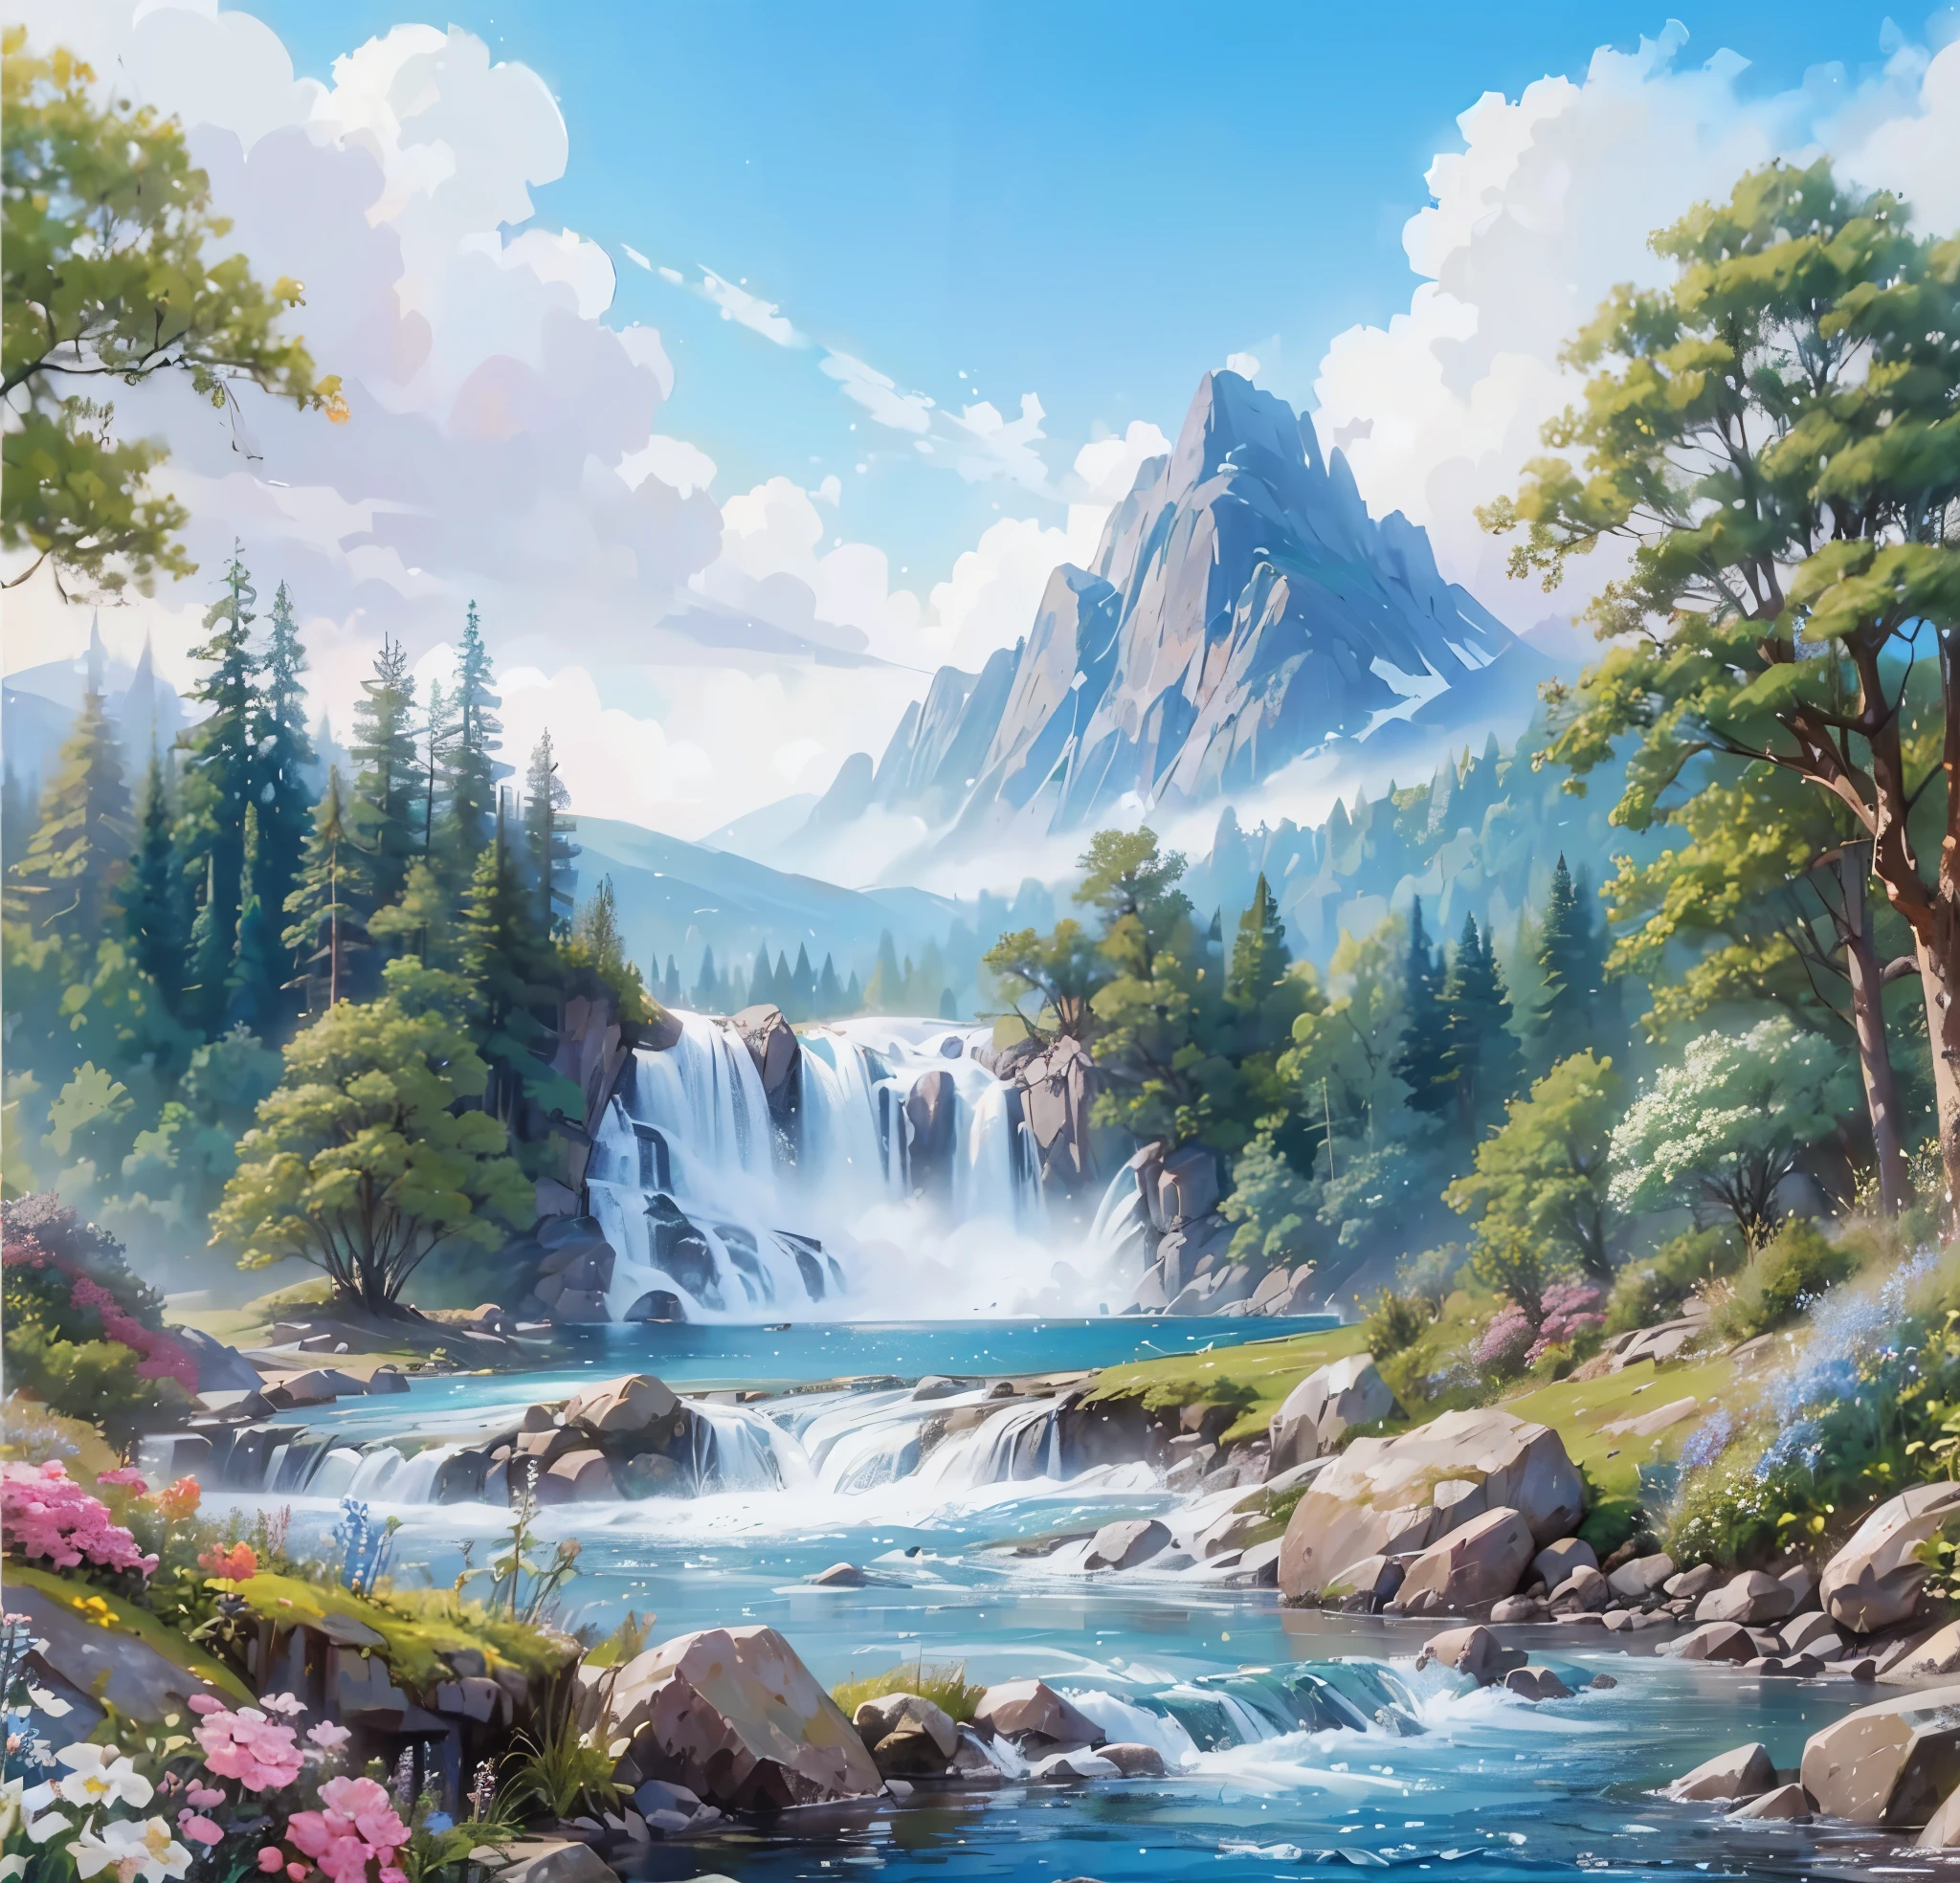 Painting of a waterfall in a mountain landscape with trees and 